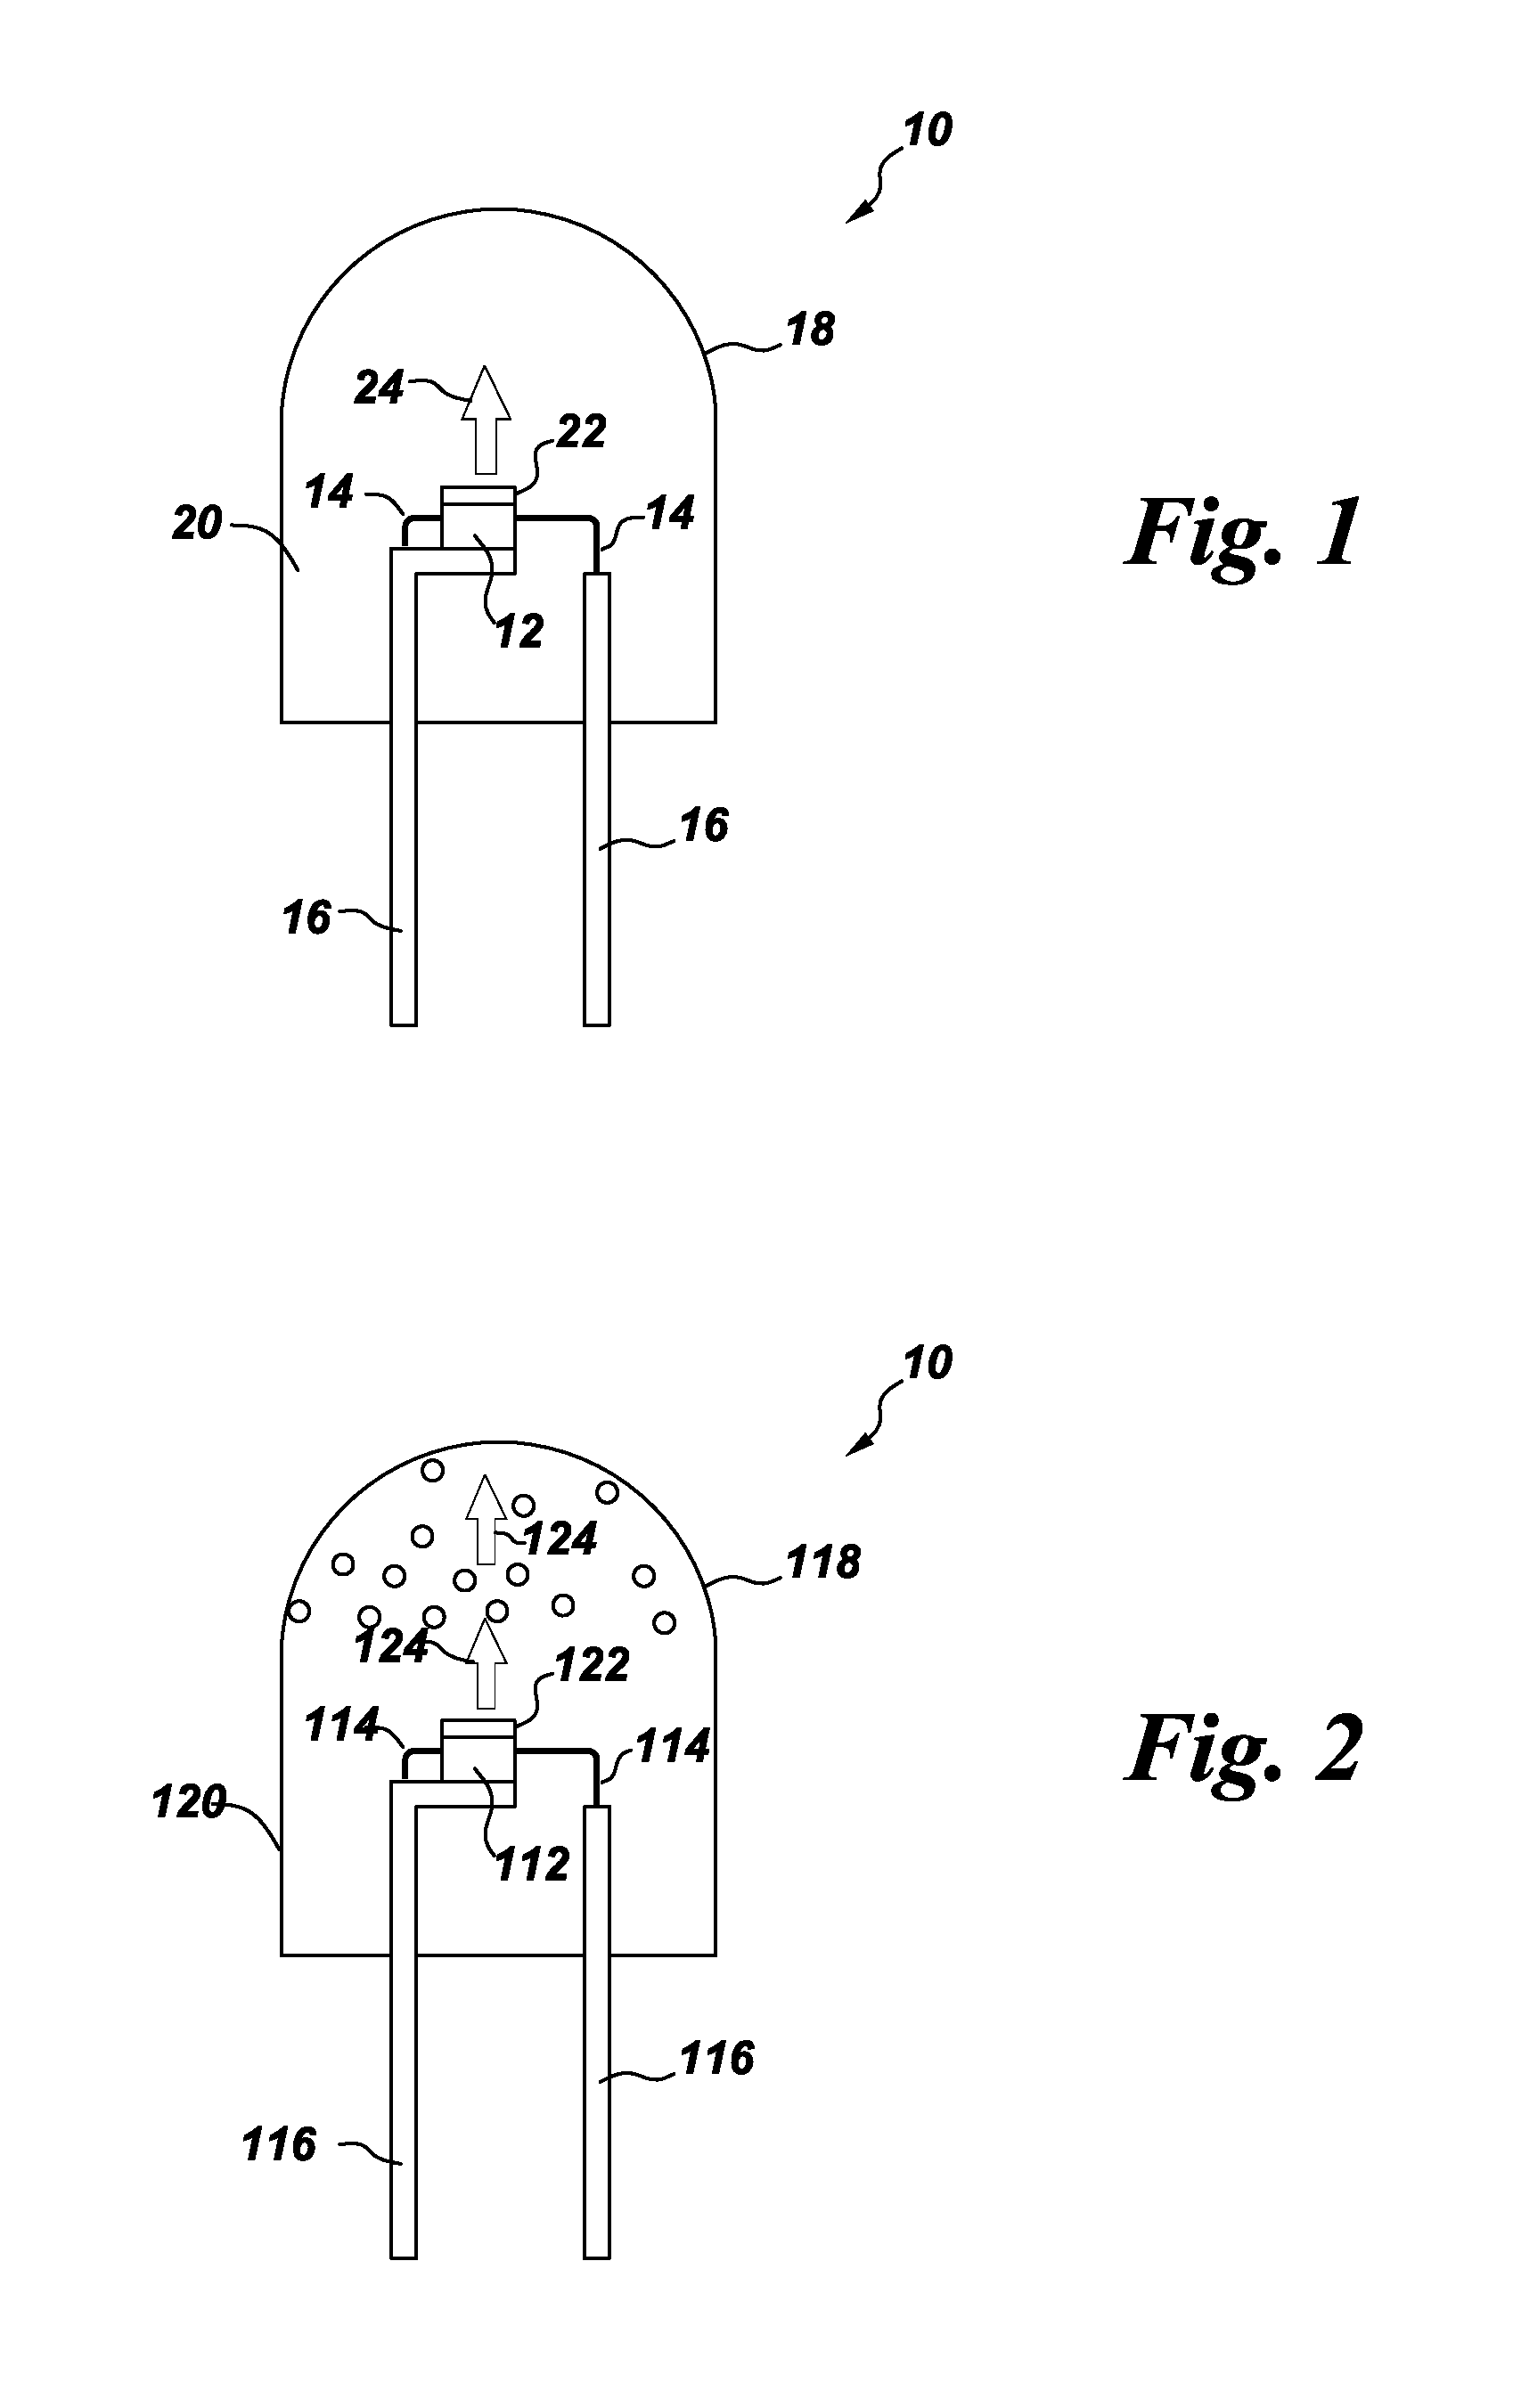 Processes for preparing color stable manganese-doped phosphors